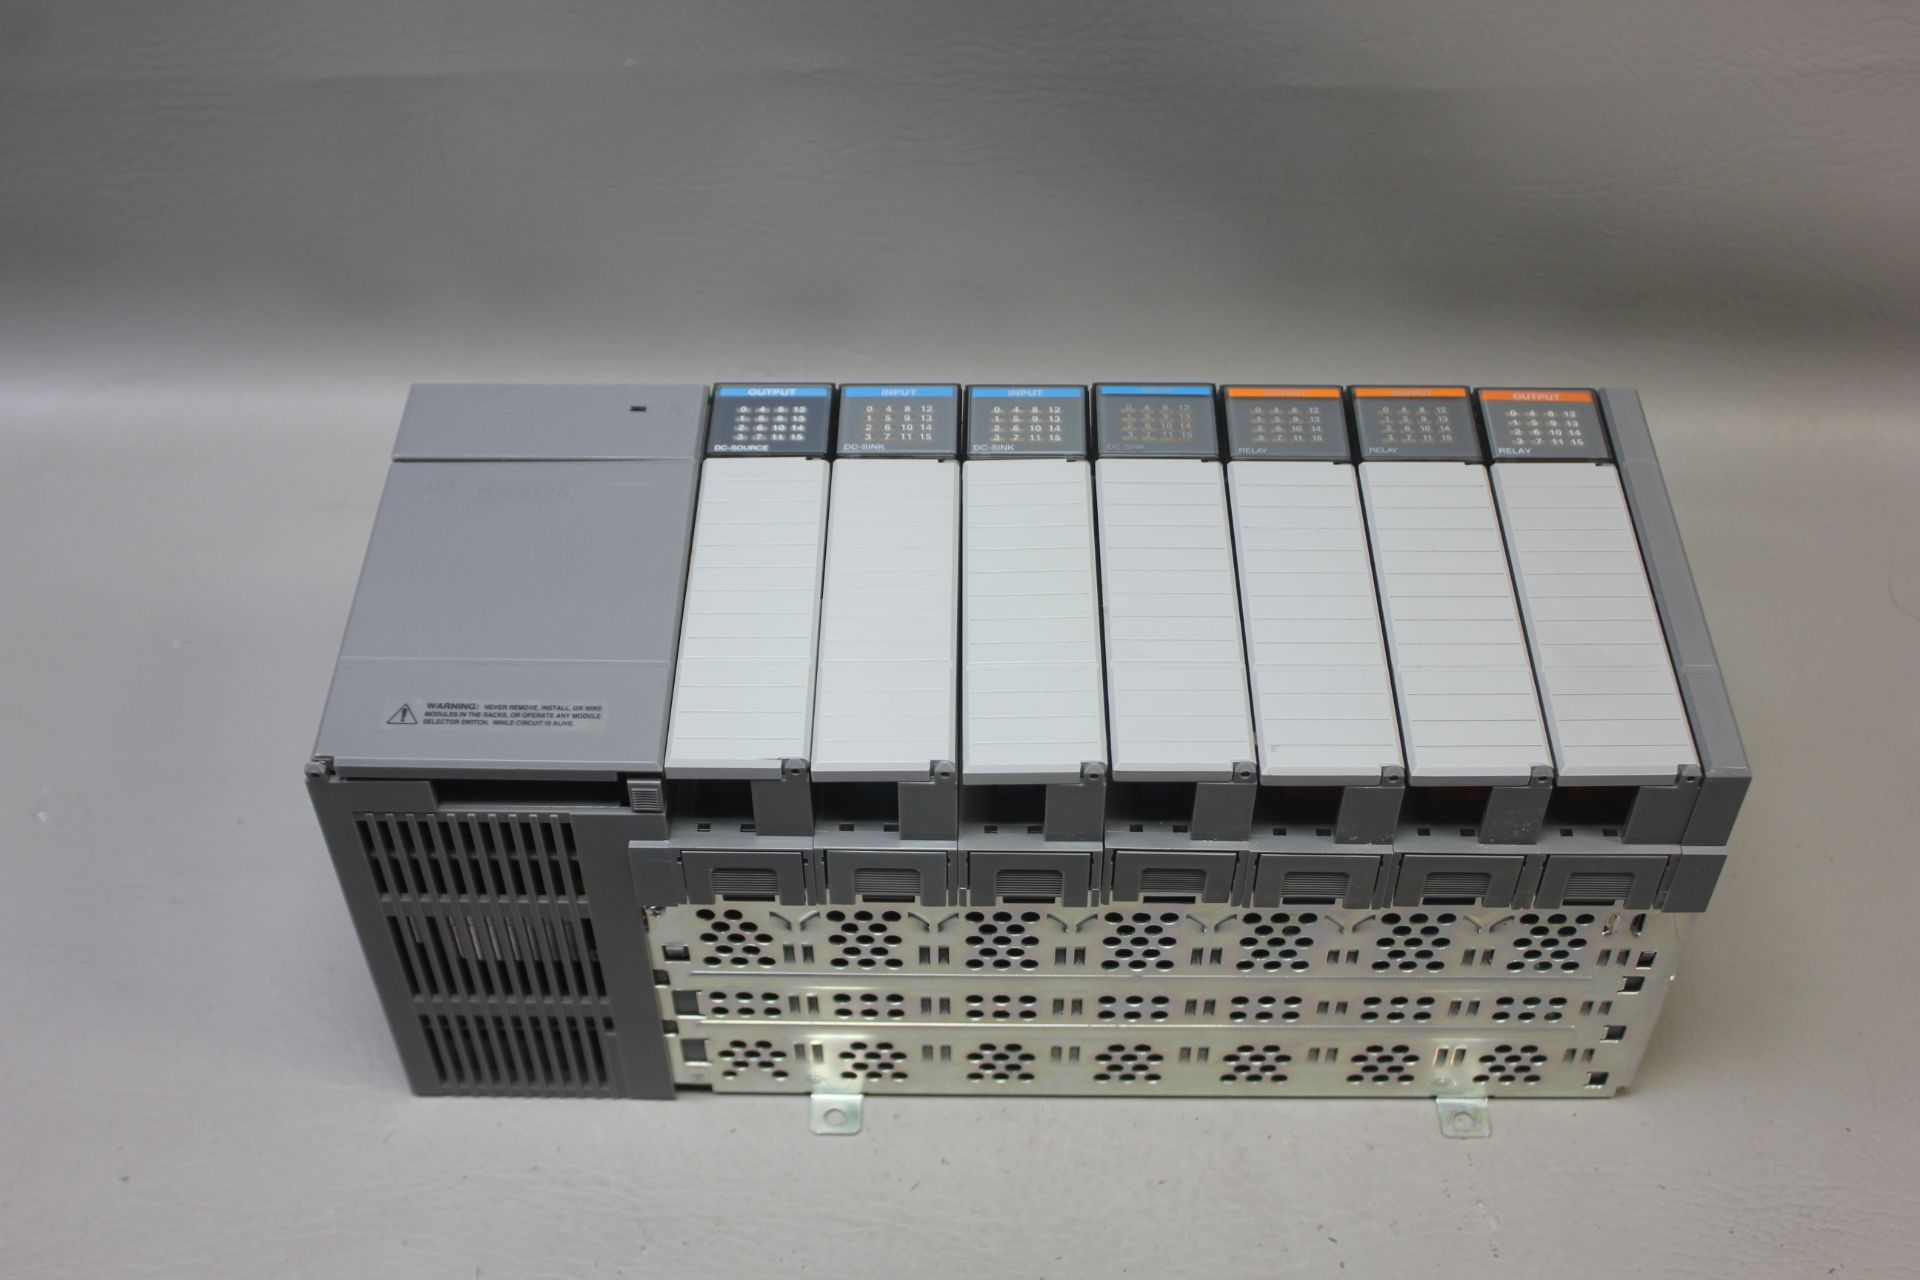 ALLEN BRADLEY 7 SLOT PLC CHASSIS WITH MODULES